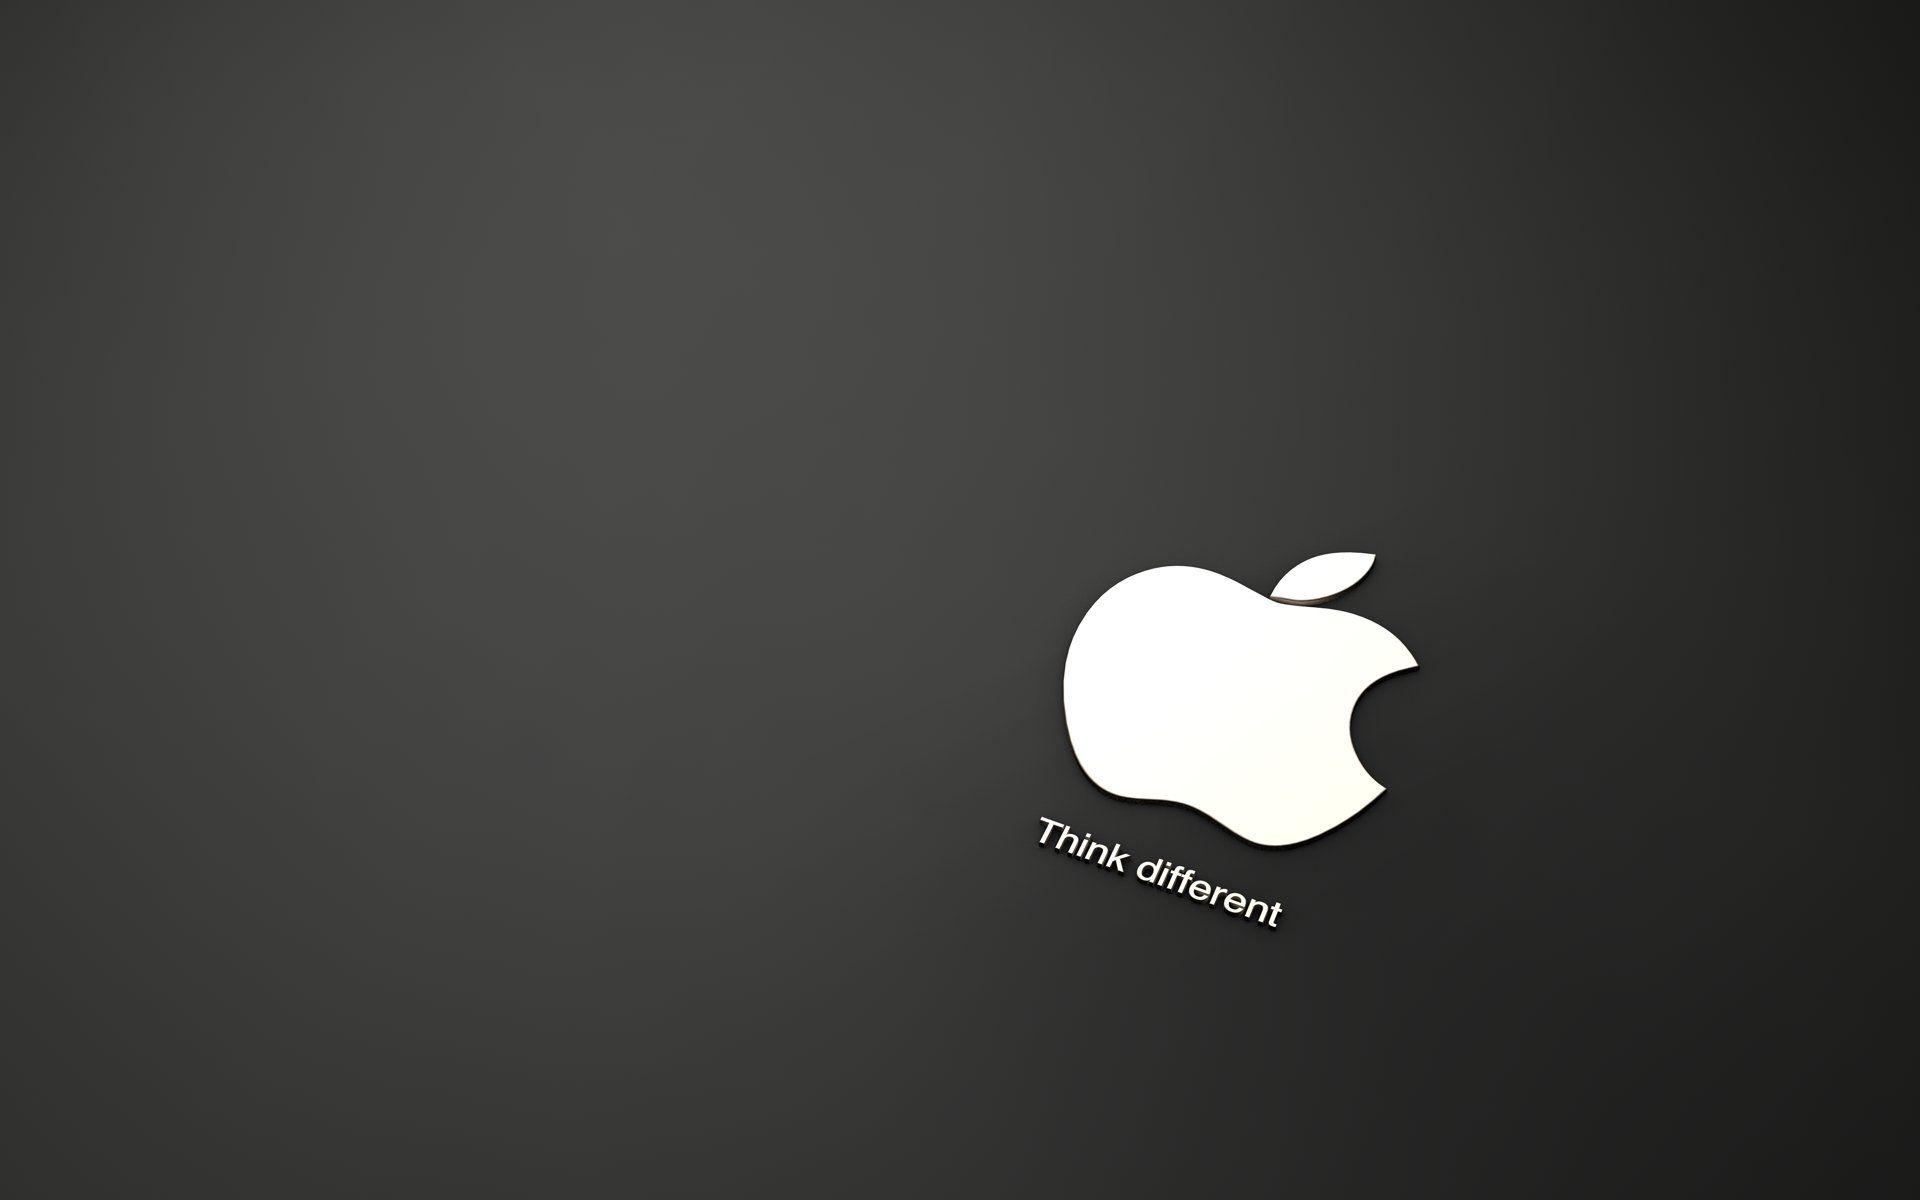 Awesome Apple Wallpaper Black and White. The Black Posters